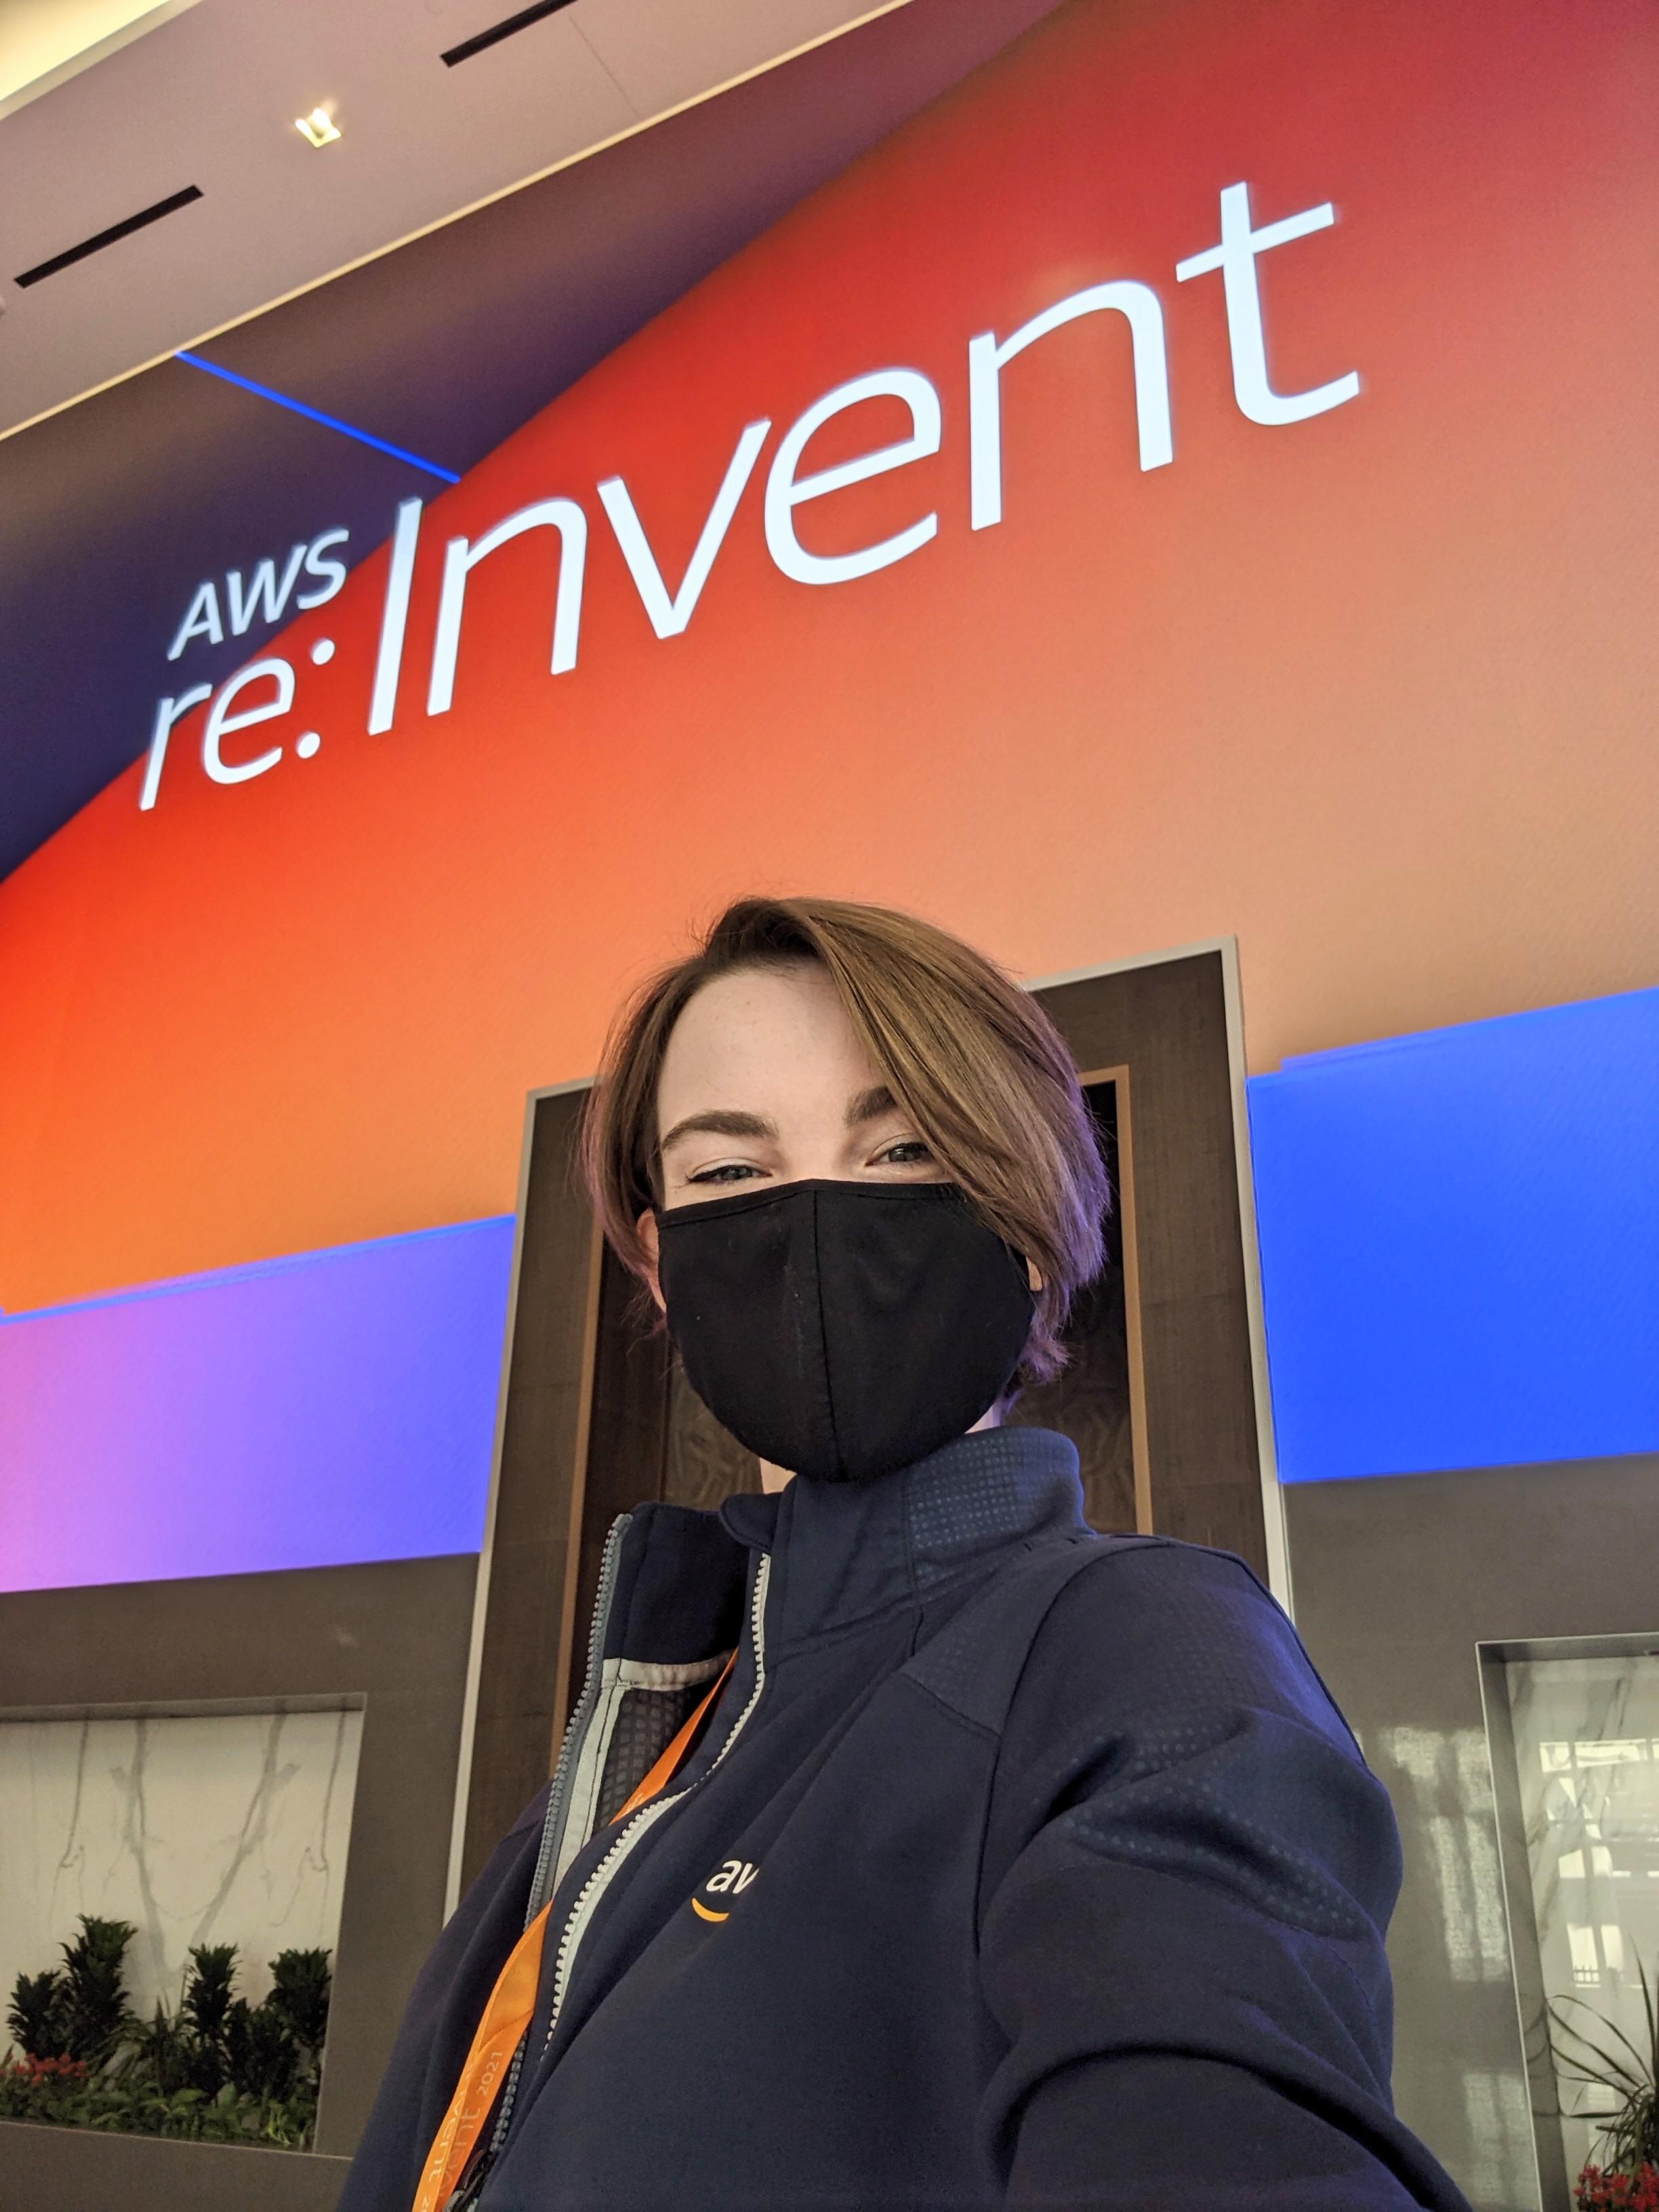 Arriving at re:Invent